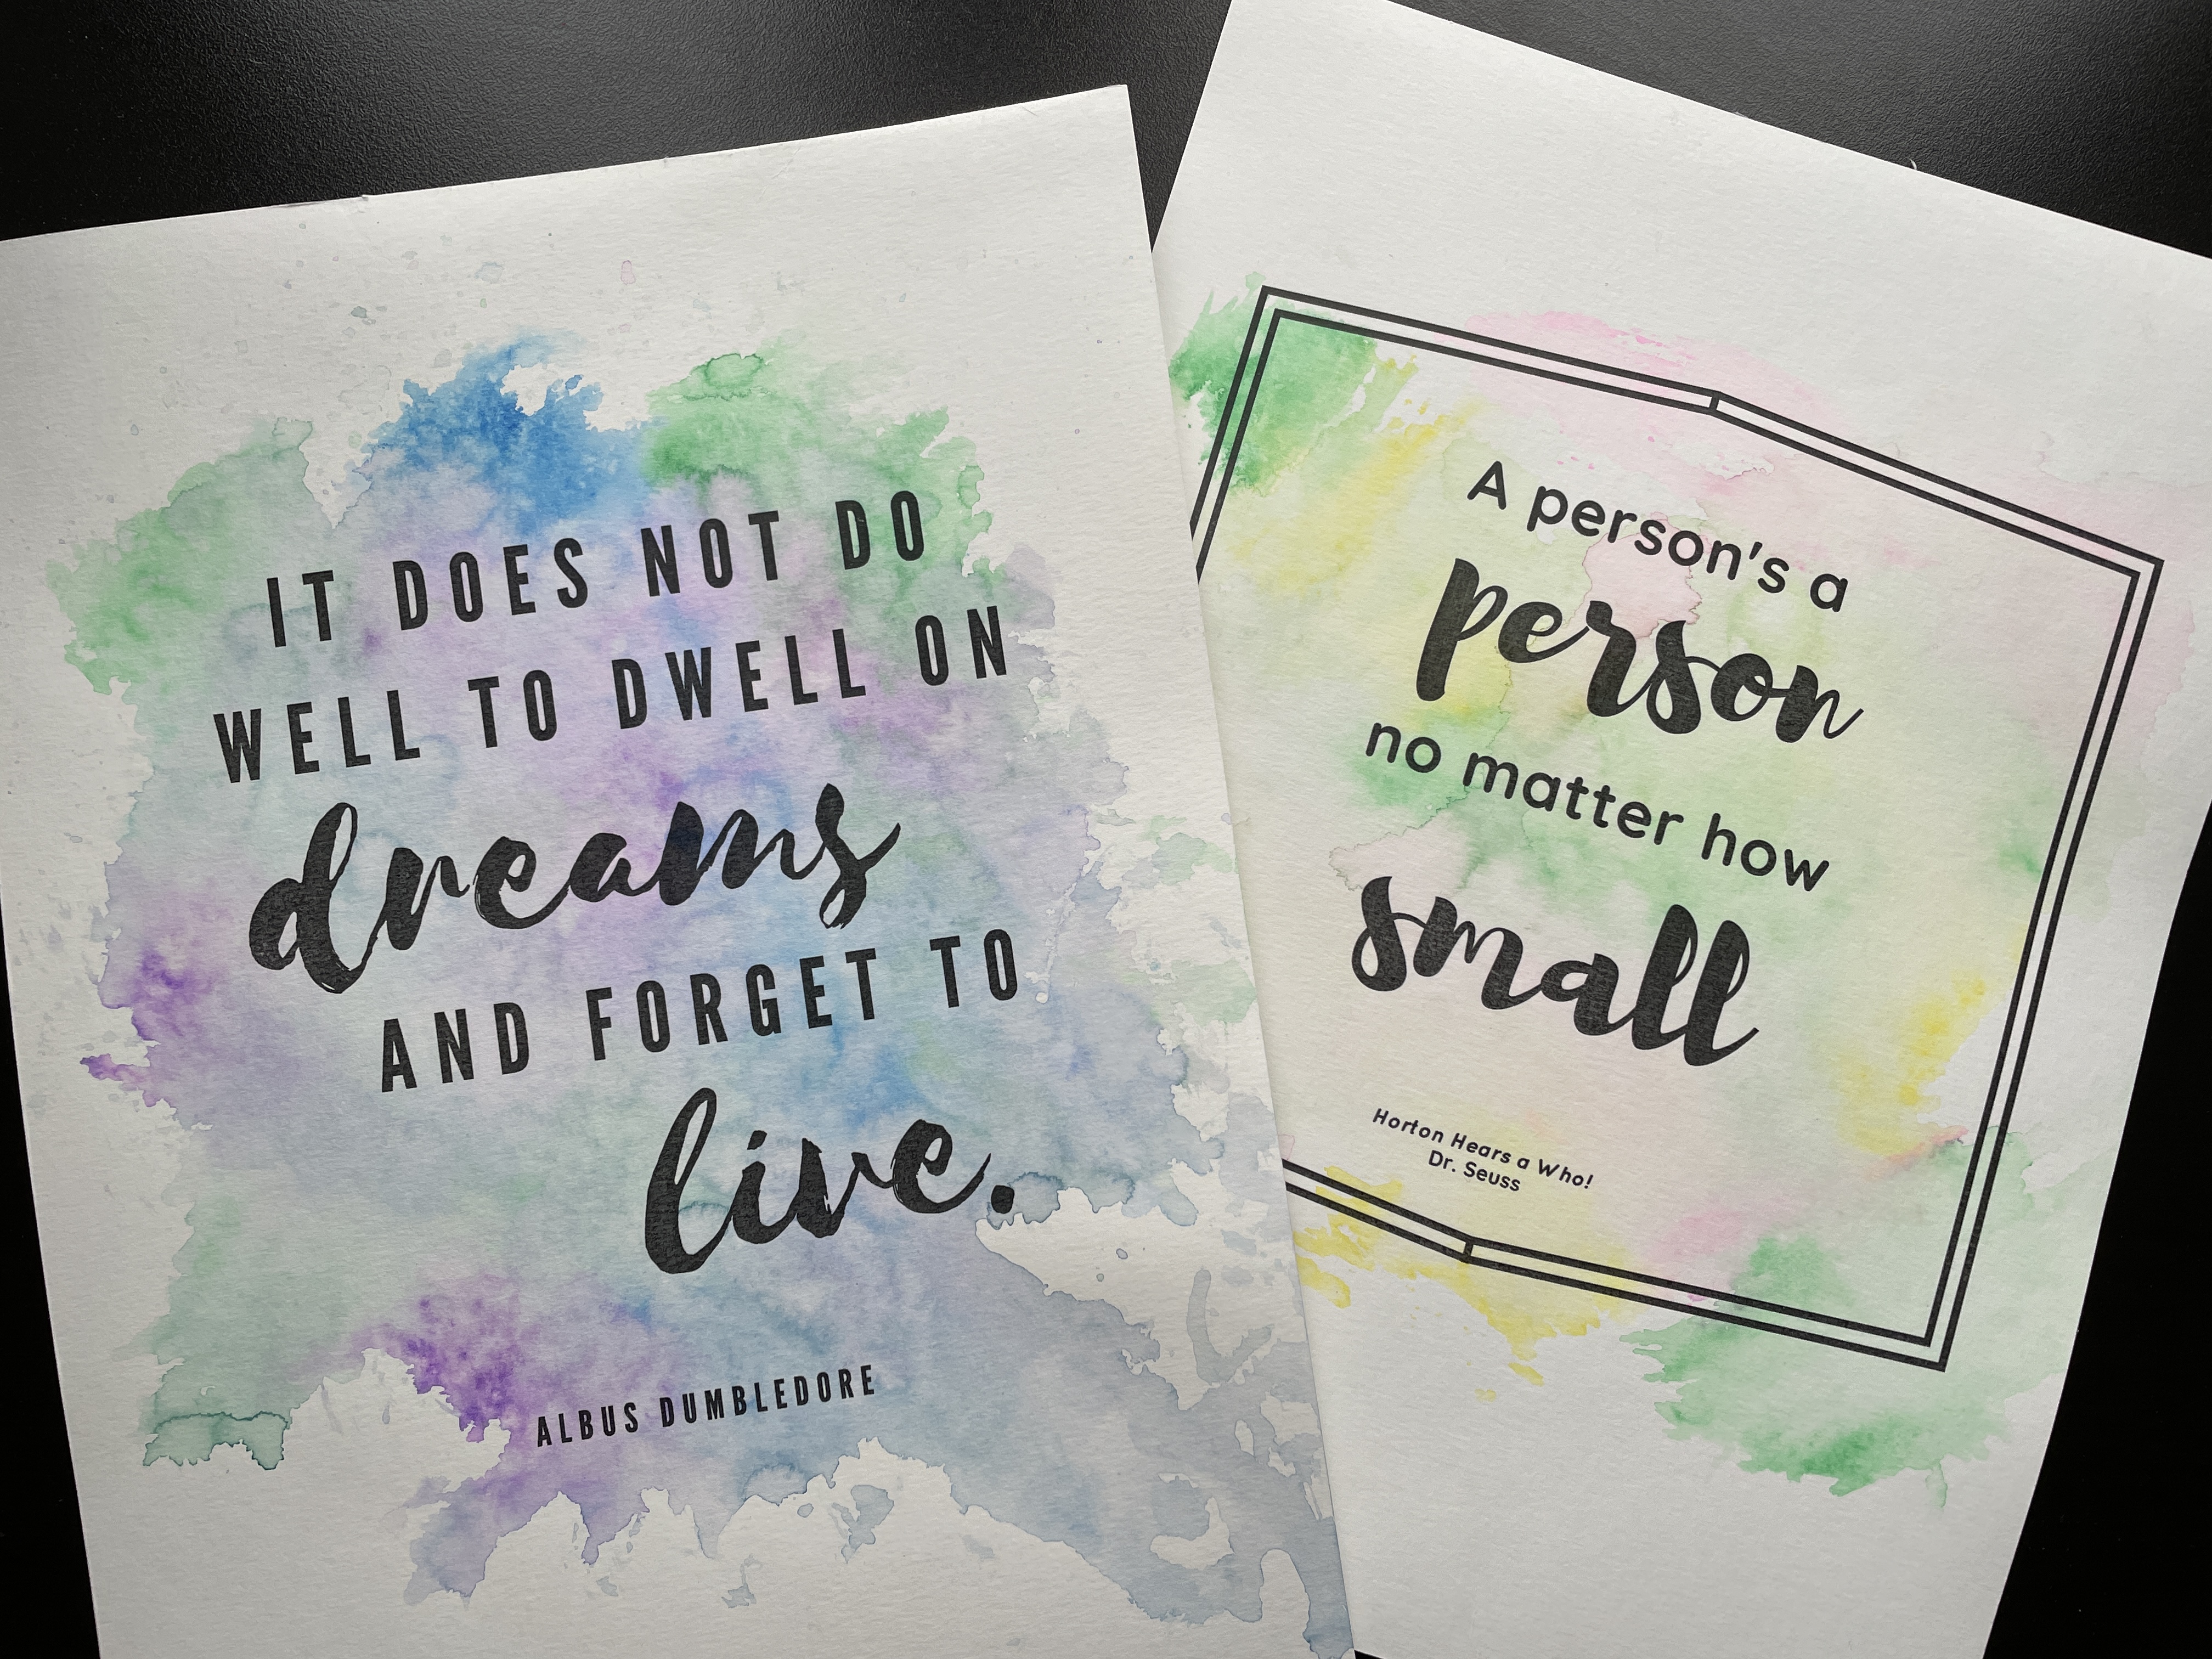 Turn quotes into watercolor art with a Ziploc bag, markers and water!